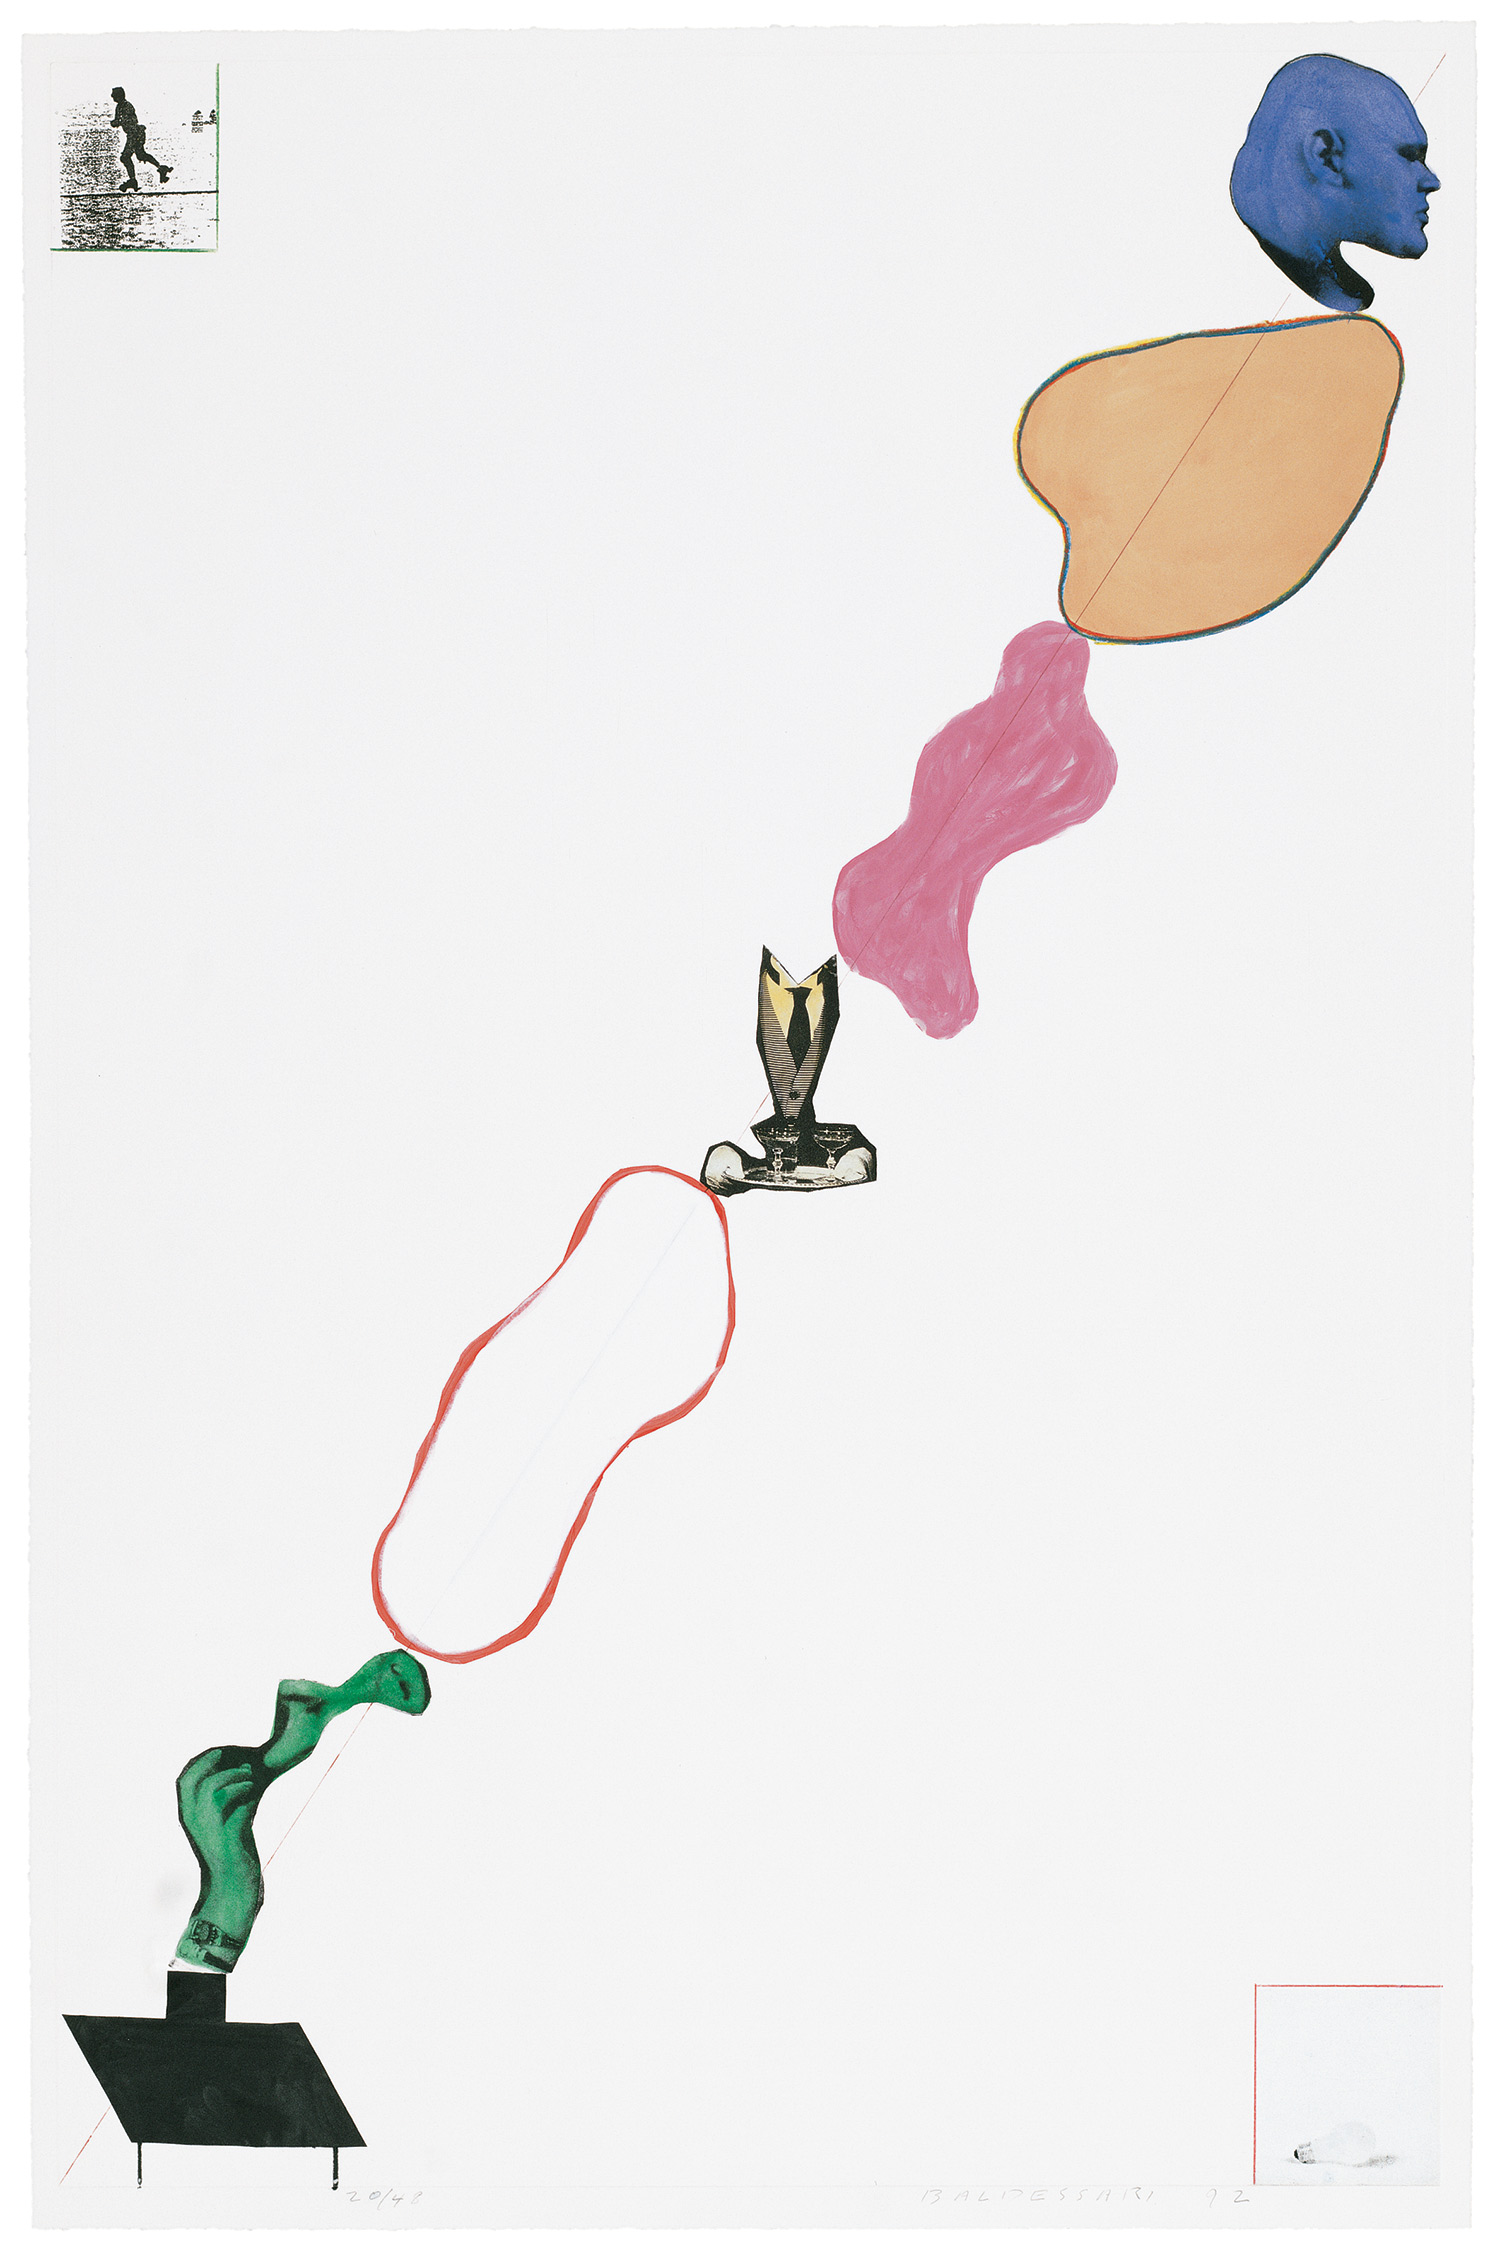   Domestic Smoke: Desire, Power, Colored Intervals, and Genie (with Two Boxed Asides) , 1992 Publisher: Olive Press Cornell University, Edition of 48.  ©&nbsp;John Baldessari 